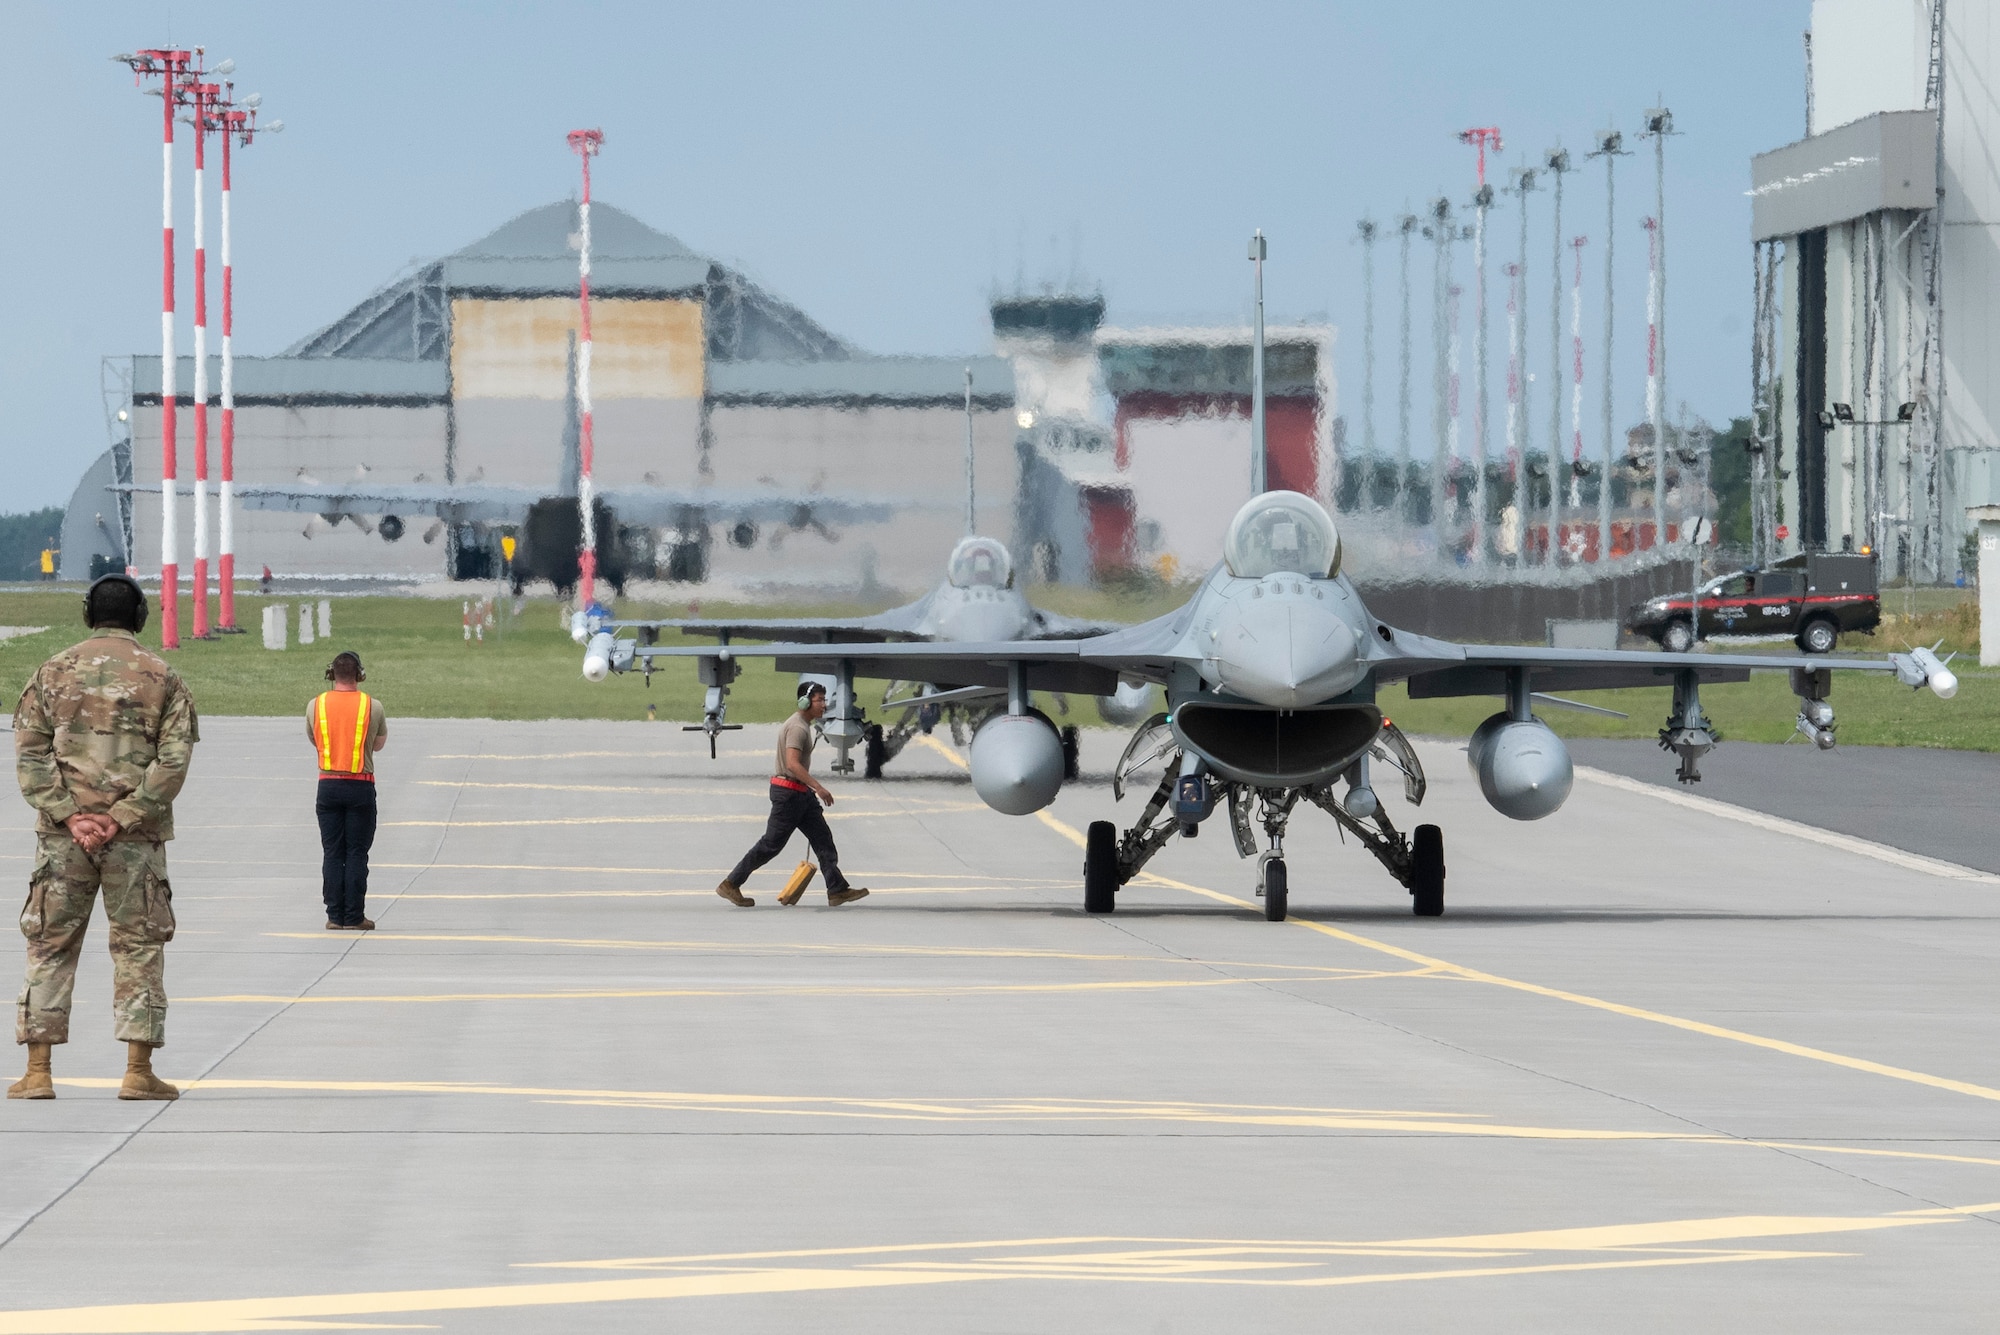 U.S. Air Force Airmen from the 480th Expeditionary Fighter Squadron receive two U.S. Air Force F-16 Fighting Falcon fighter jets at Powidz Air Base, Poland, Aug. 10, 2021. The Airmen incorporated Agile Combat Employment concepts by transporting a small contingency of Airmen from Łask Air Base, Poland, specifically to test the hot pit refueling capabilities of the Versatile Integrating Partner Equipment Refueling Kit (VIPER) kit. (U.S. Air Force photo by Tech. Sgt. Anthony Plyler)